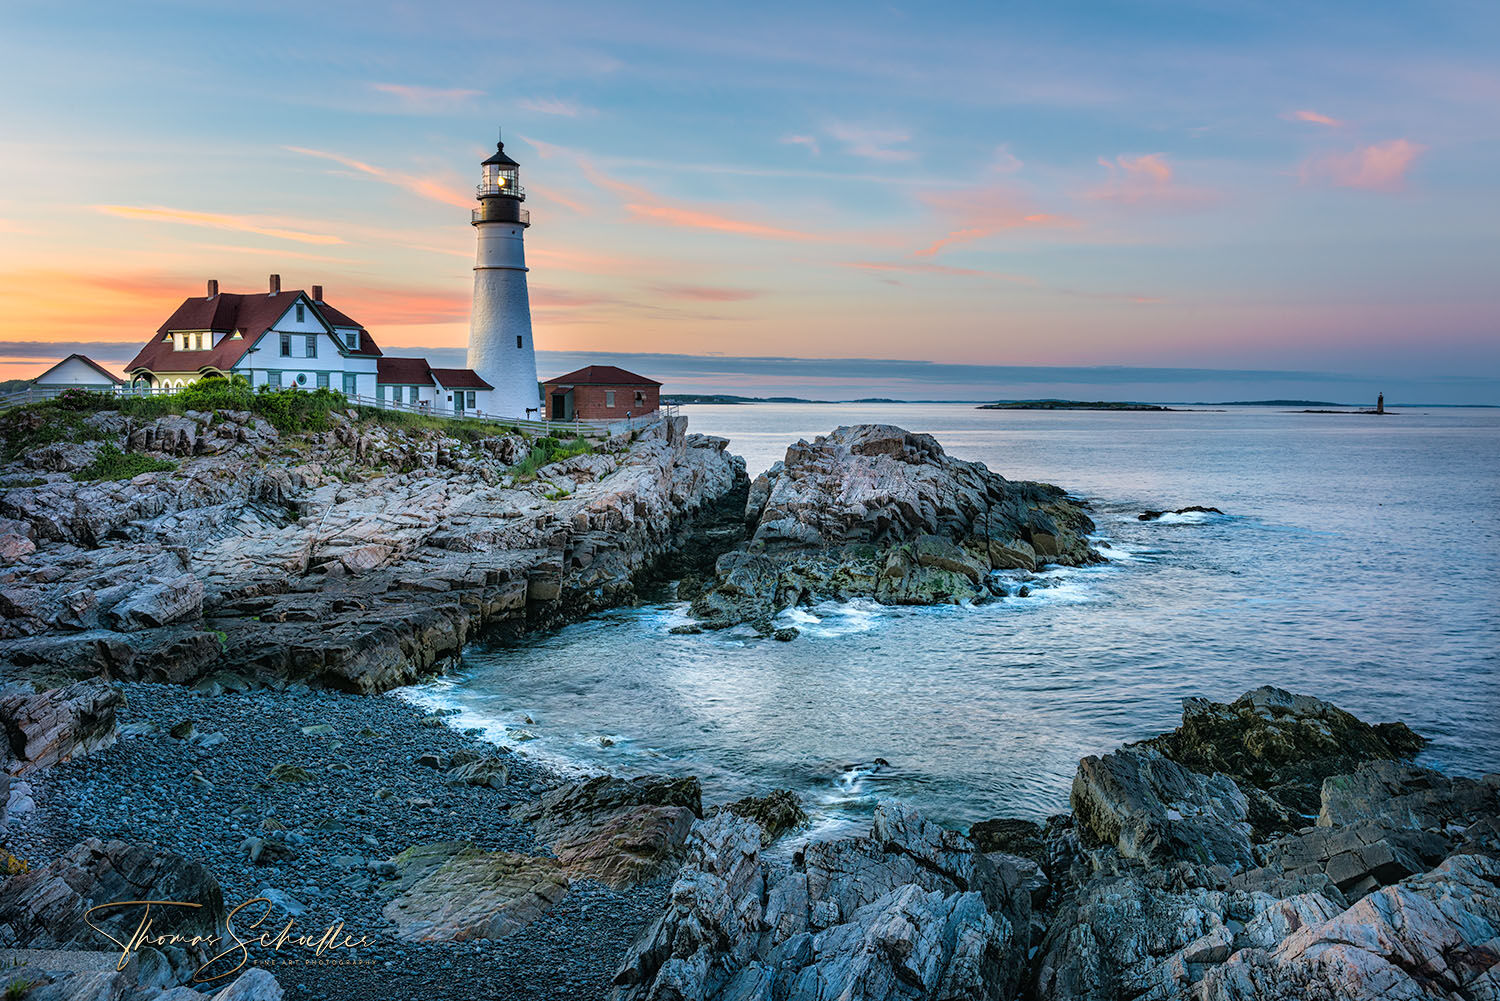 The Portland Head Lighthouse in Cape Elizabeth Maine during a stunning sunset | One of the most beautiful Maine lighthouses - Fine Art Prints for sale